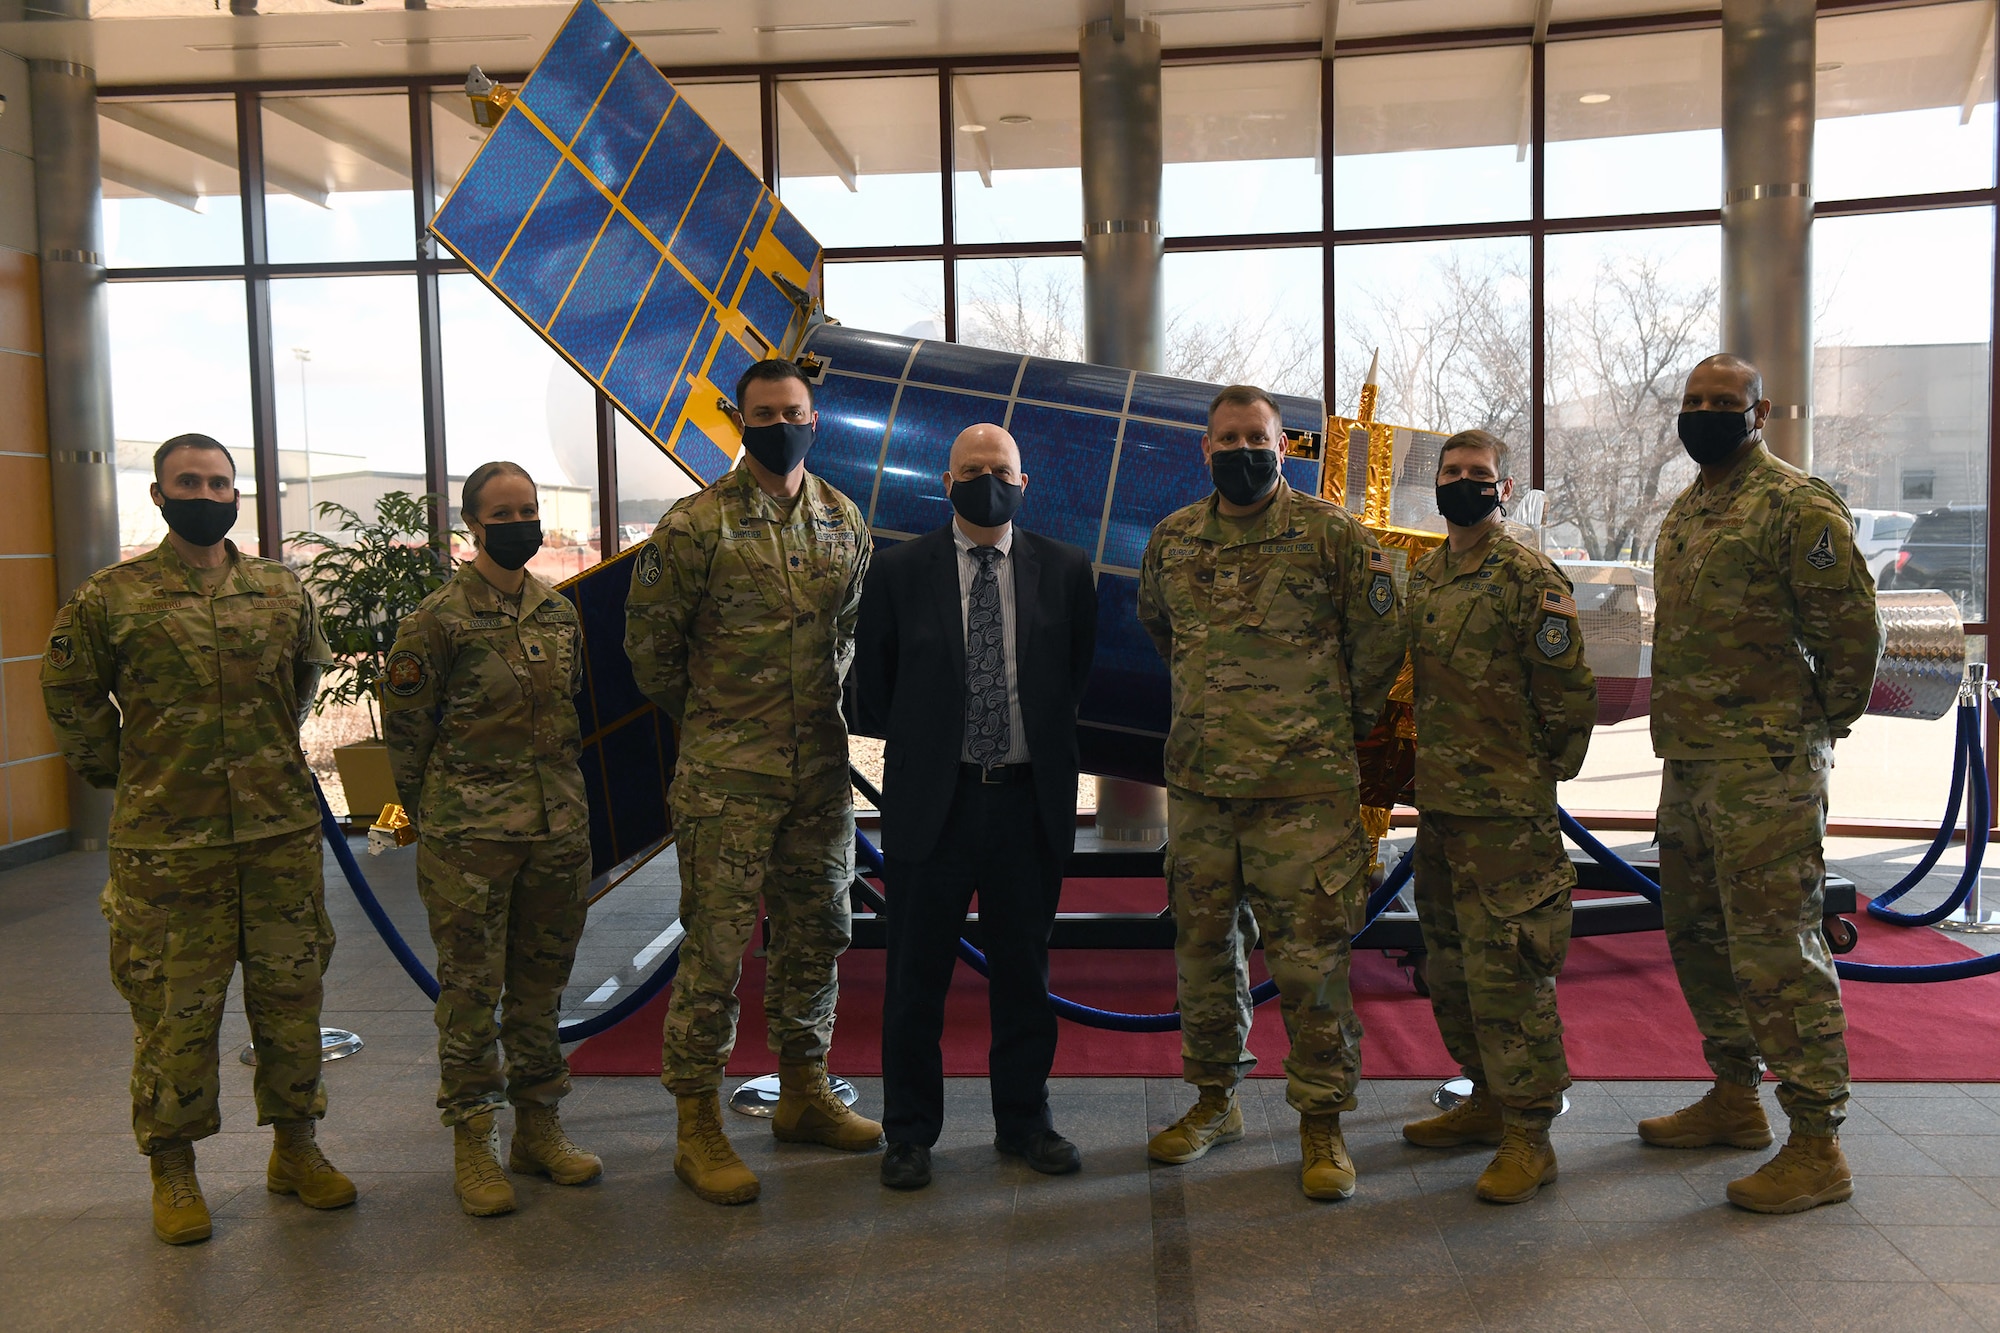 The Honorable John P. Roth, Acting Secretary of the Air Force, and members of Space Delta 4 pose for a photo in front of a Defense Support Program spacecraft model in the Mission Control Station on Buckley Air Force Base, Colo., March 11, 2021. During his visit, Team Buckley demonstrated their alignment with the Department of the Air Force priorities. (U.S. Space Force photo by Airman 1st Class Haley N. Blevins)